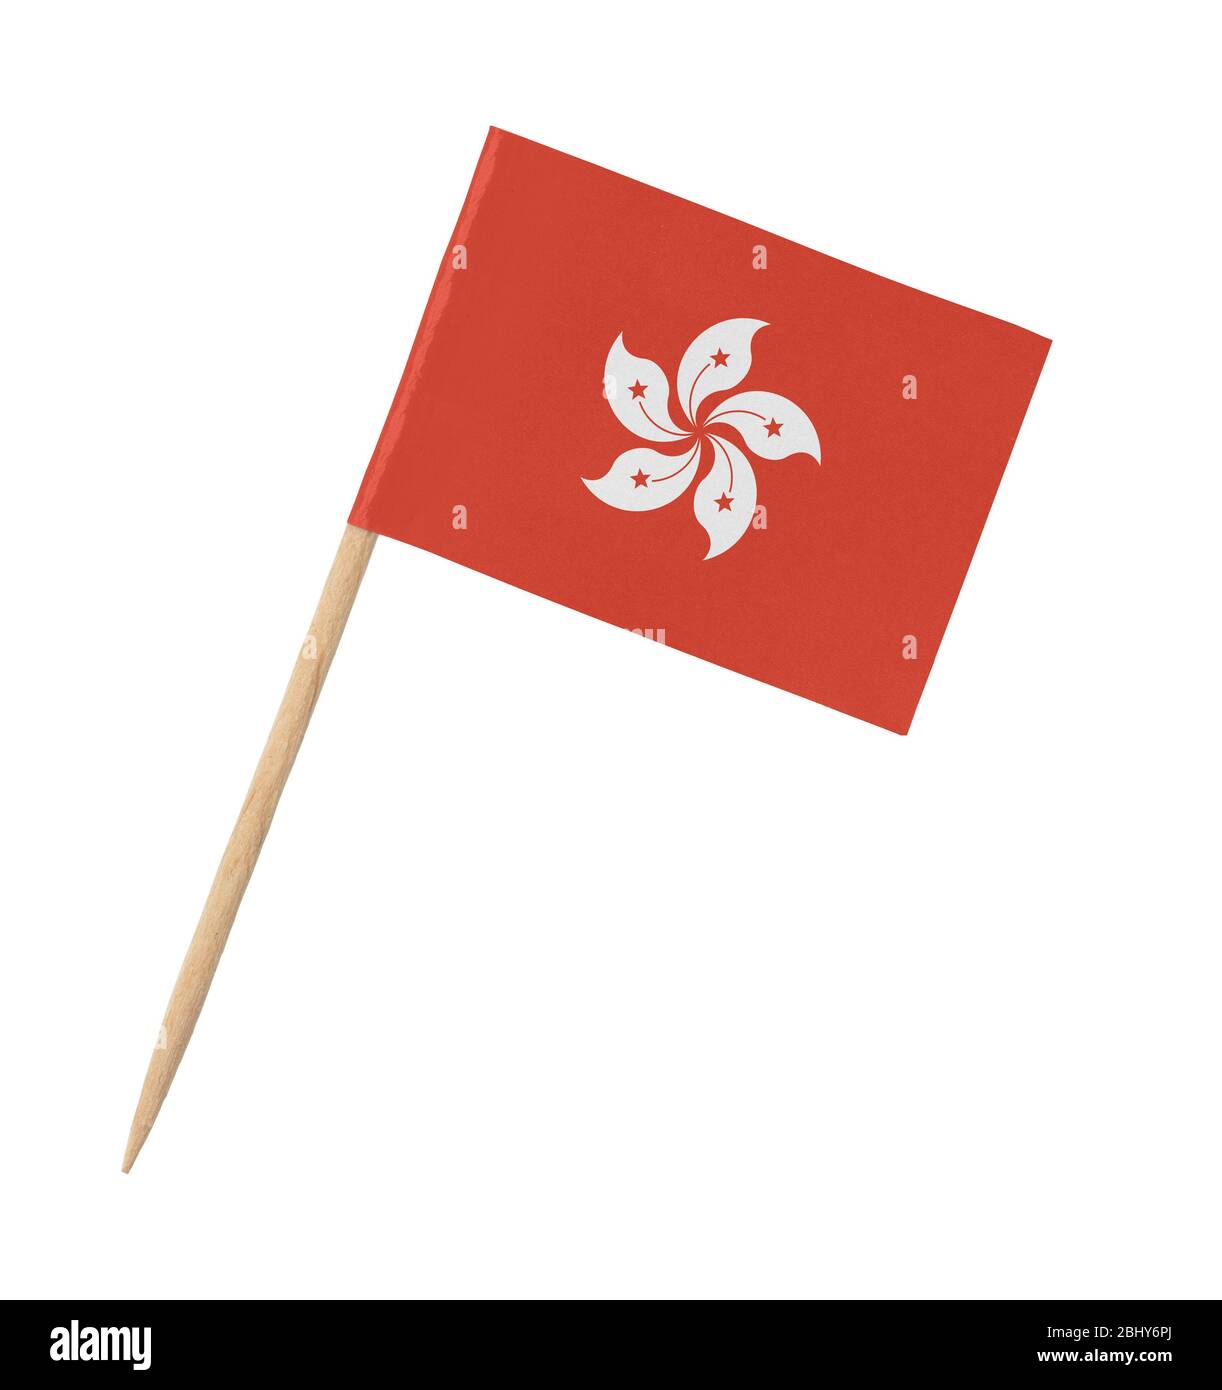 Small paper flag of Hong Kong on wooden stick, isolated on white Stock Photo